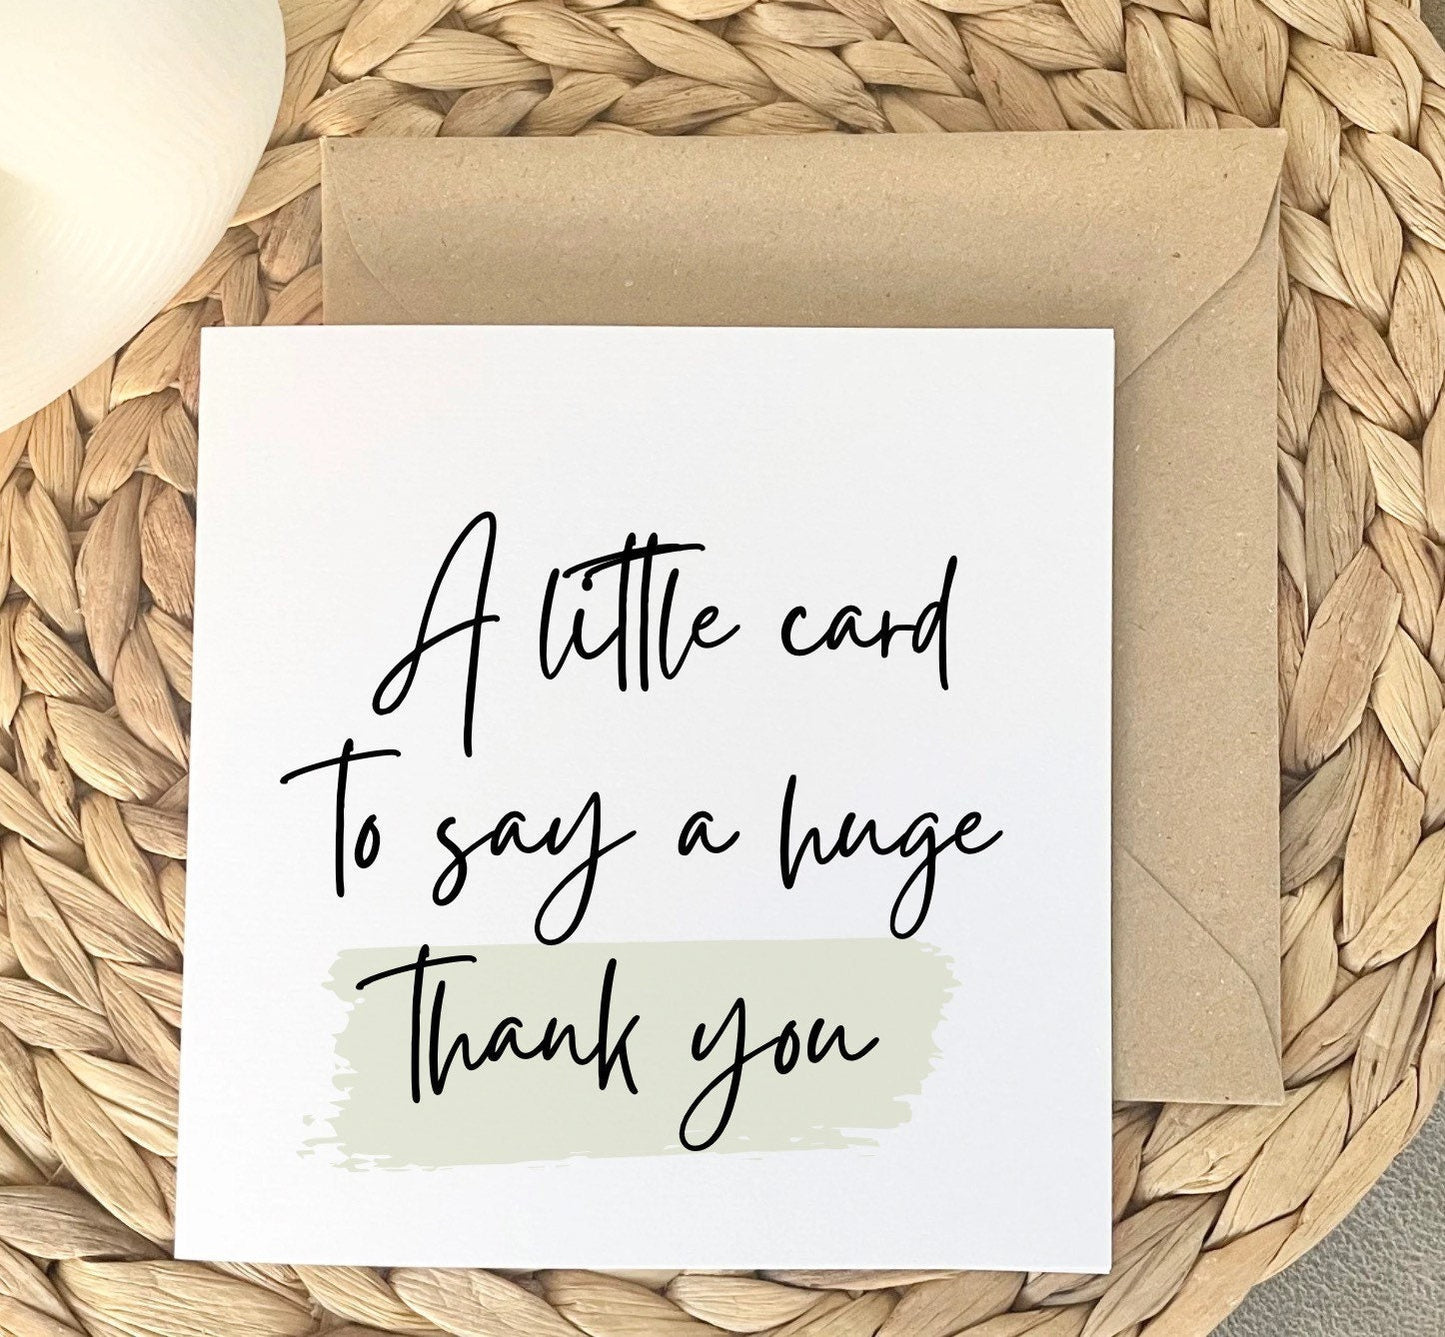 Simple thank you card, a little card to say a huge thank you, supportive sister or friend thank you card, thank you for your help